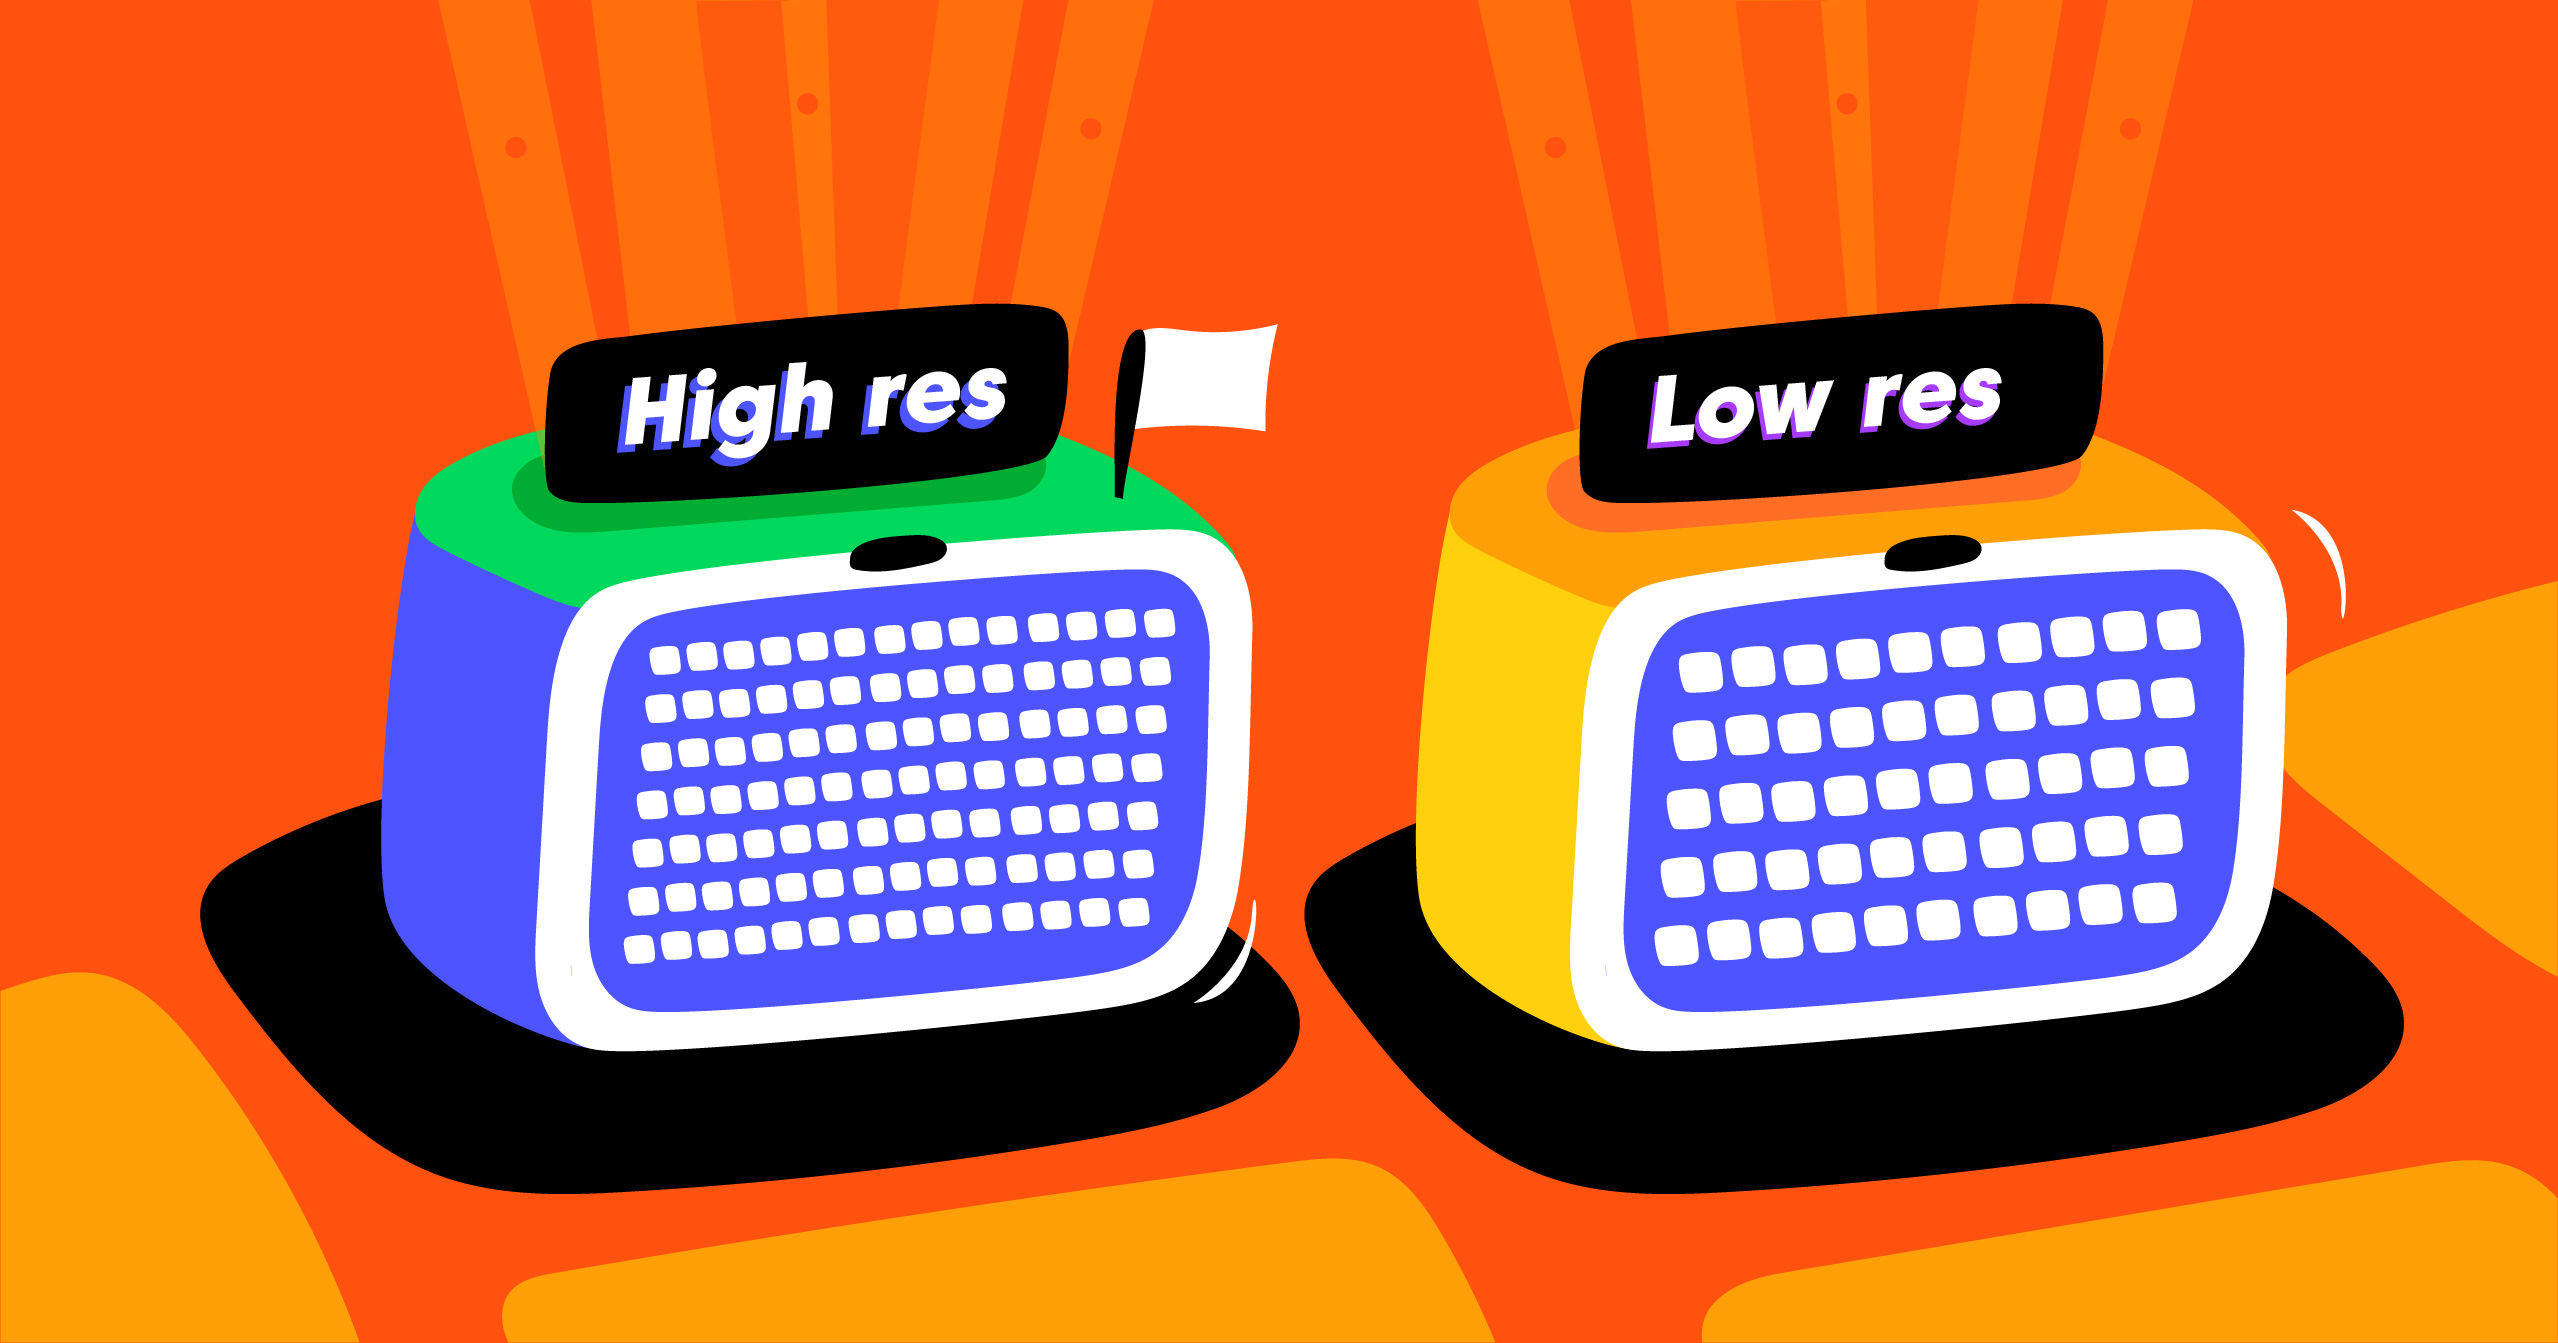 High Resolution vs Low Resolution: How it Matters